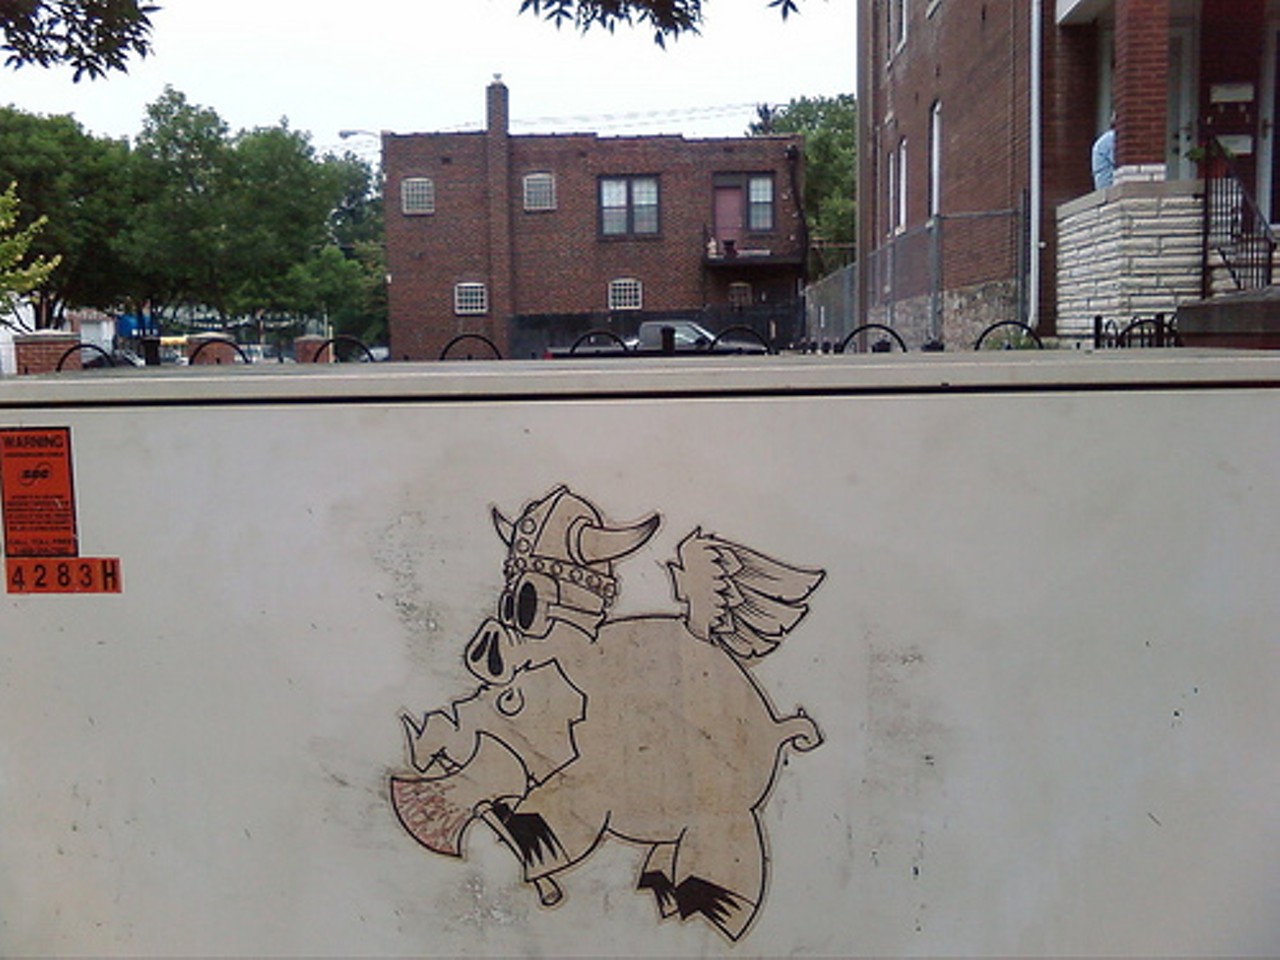 A "flying viking pig" by Oheck! Read State of Street Art: Vandalism or legit, it's not going away by Keegan Hamilton.